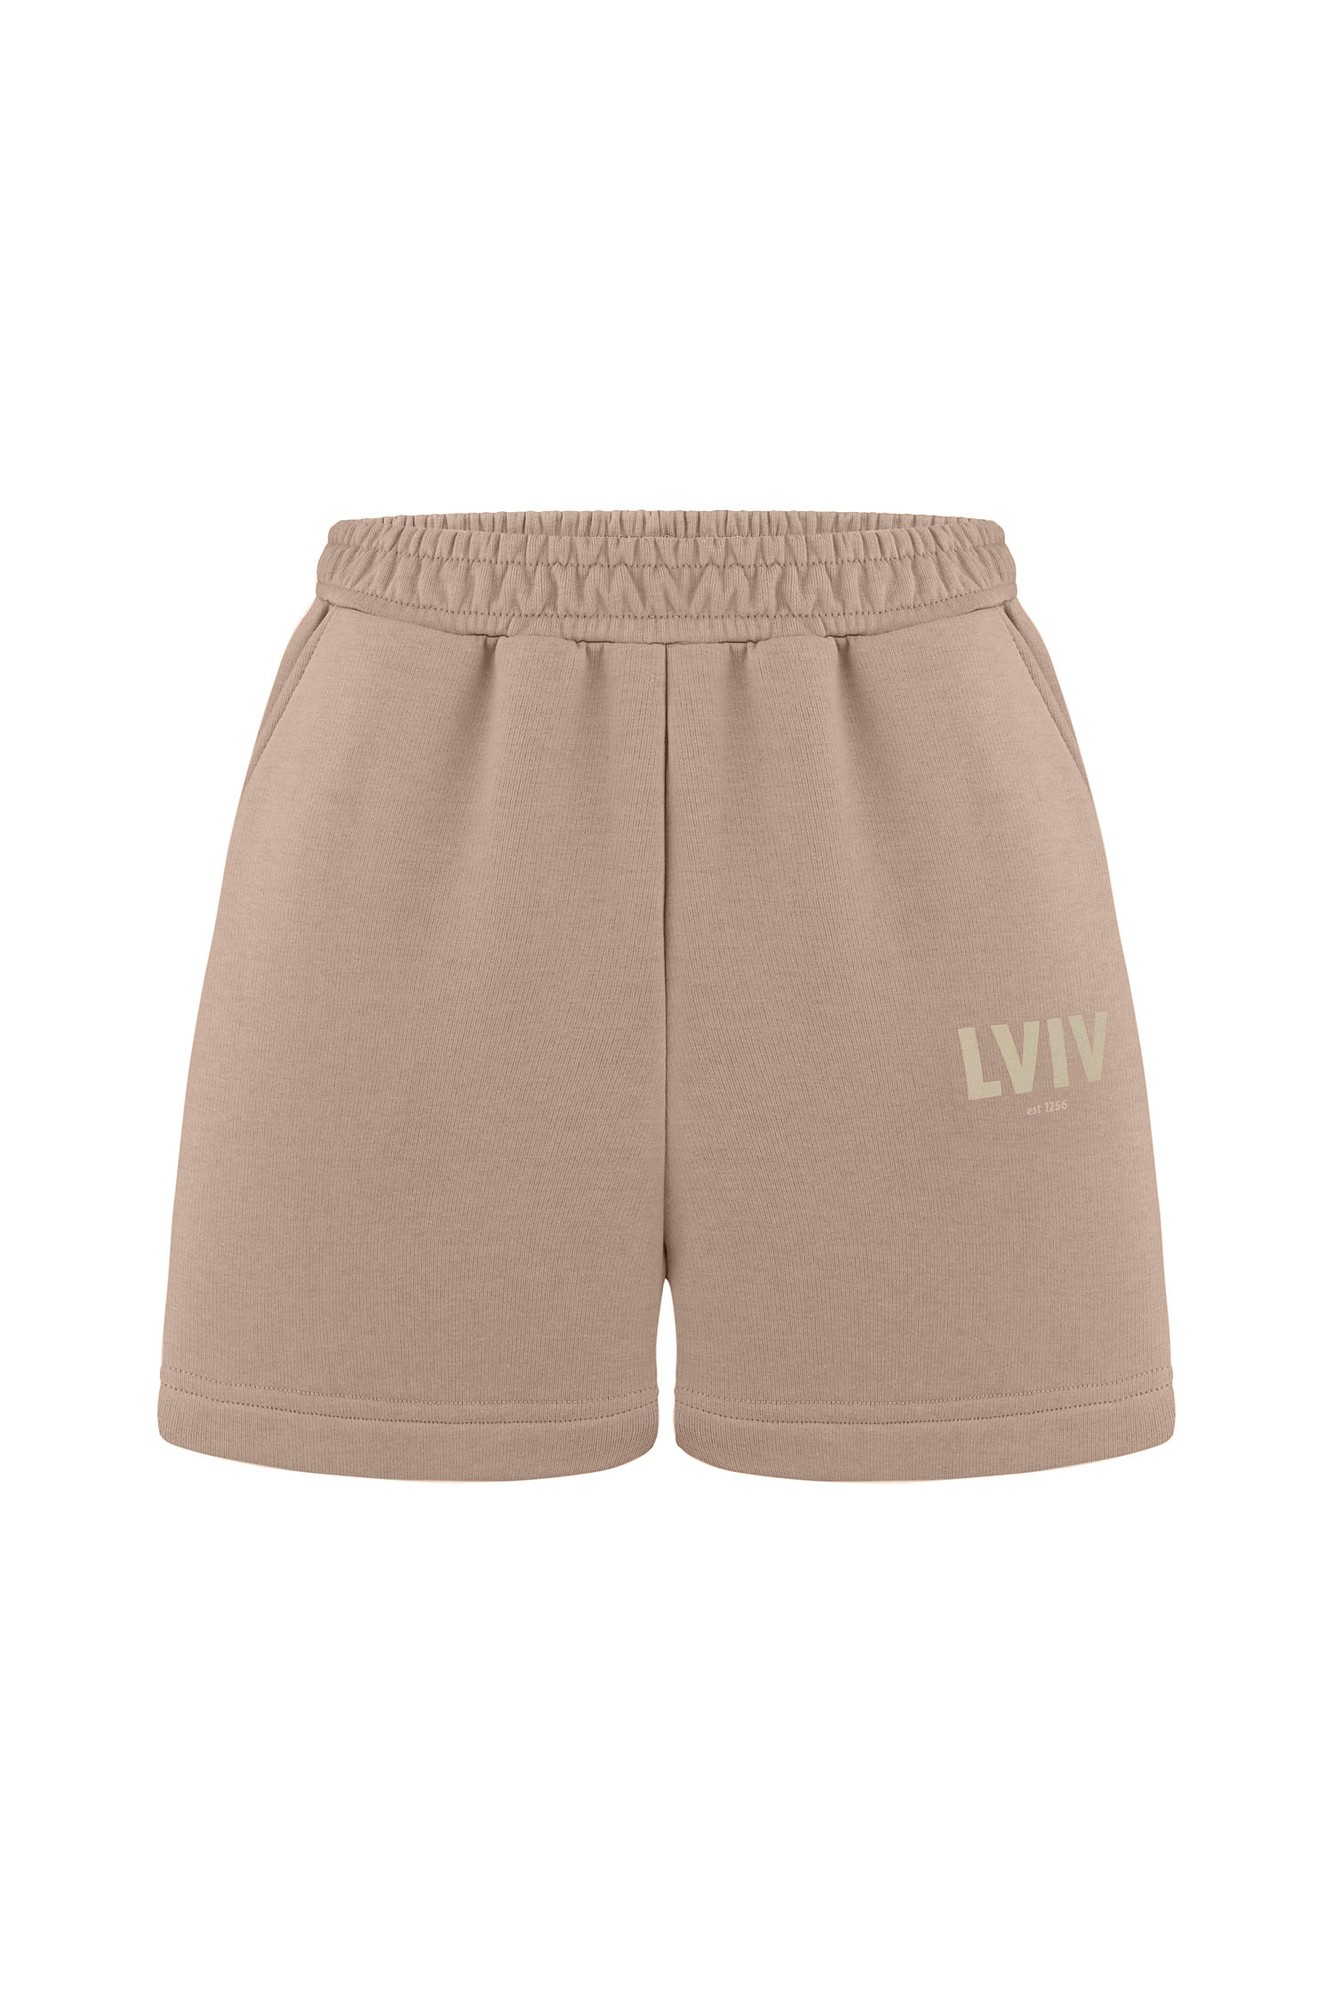 Shorts in beige with Lviv print